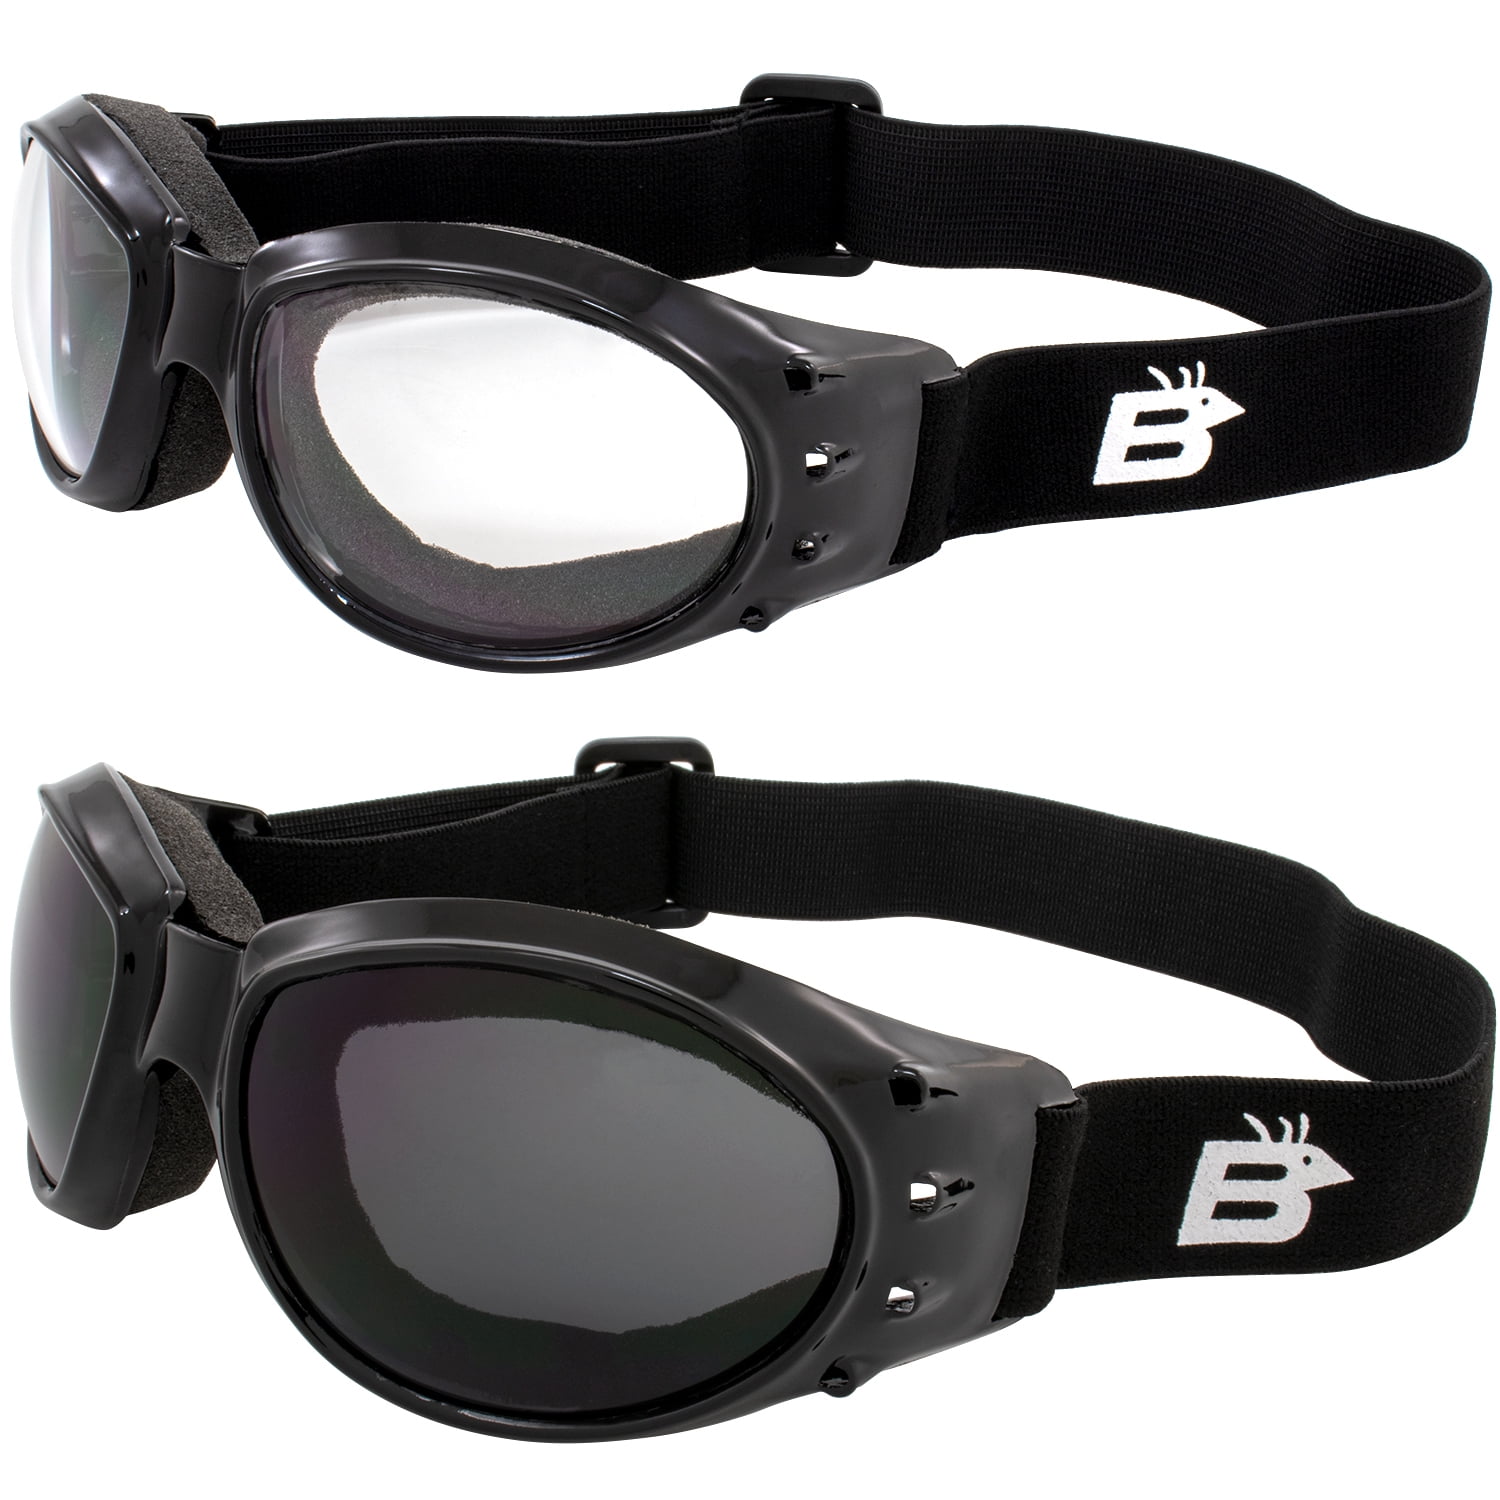 Two Pairs of Global Vision Eliminator Deluxe Red Baron Style Padded Motorcycle Goggles Black Frames Smoke and Clear Lens